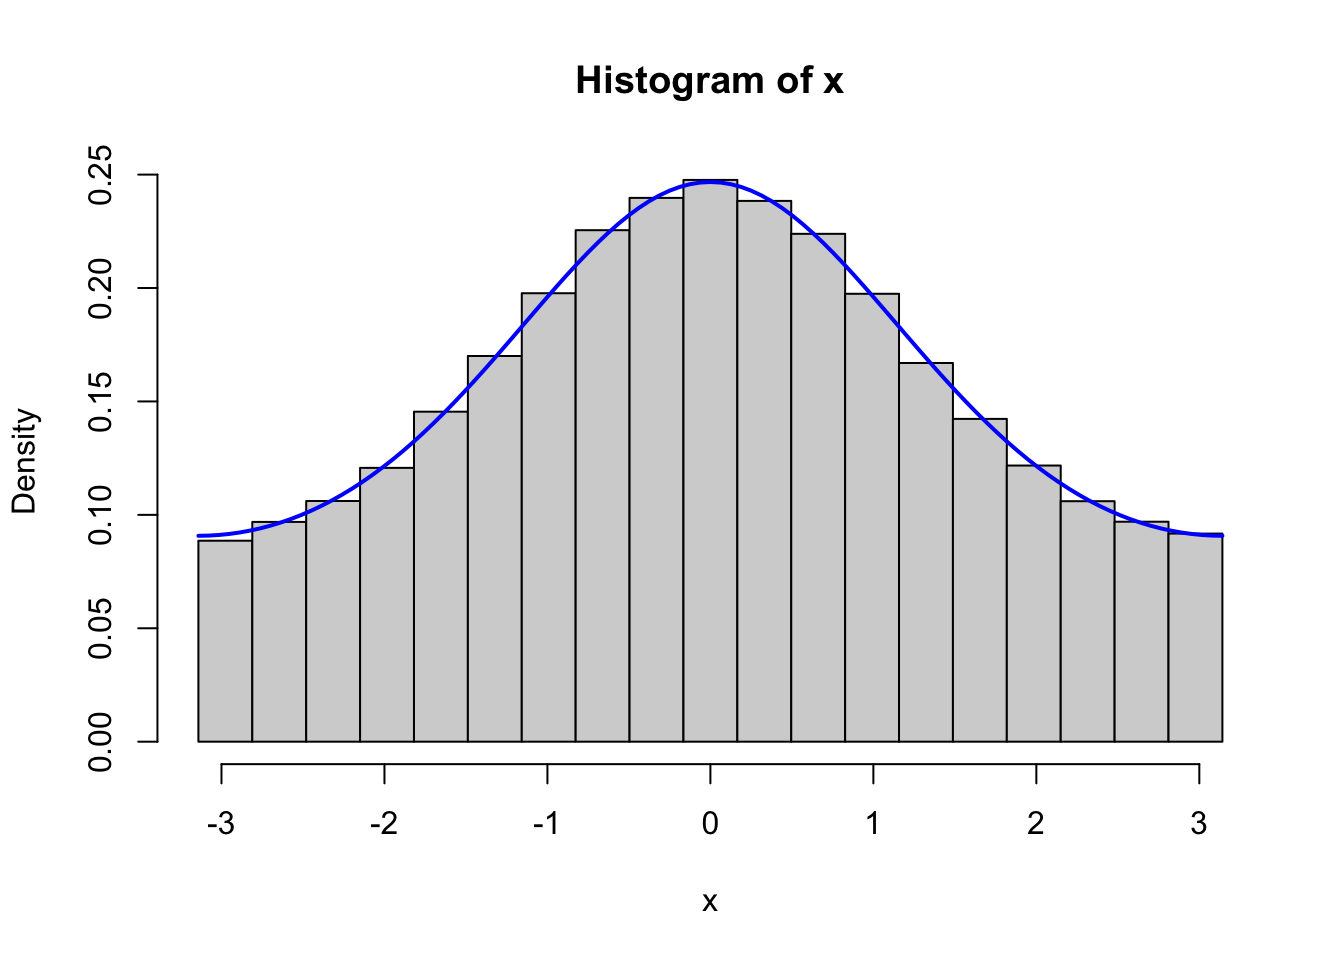 Histograms of 100,000 simulated data points from von Mises distributions with parameters \(\kappa = 0.5\) (left) and \(\kappa = 2\) (right). The true densities (blue) are added to the plots.